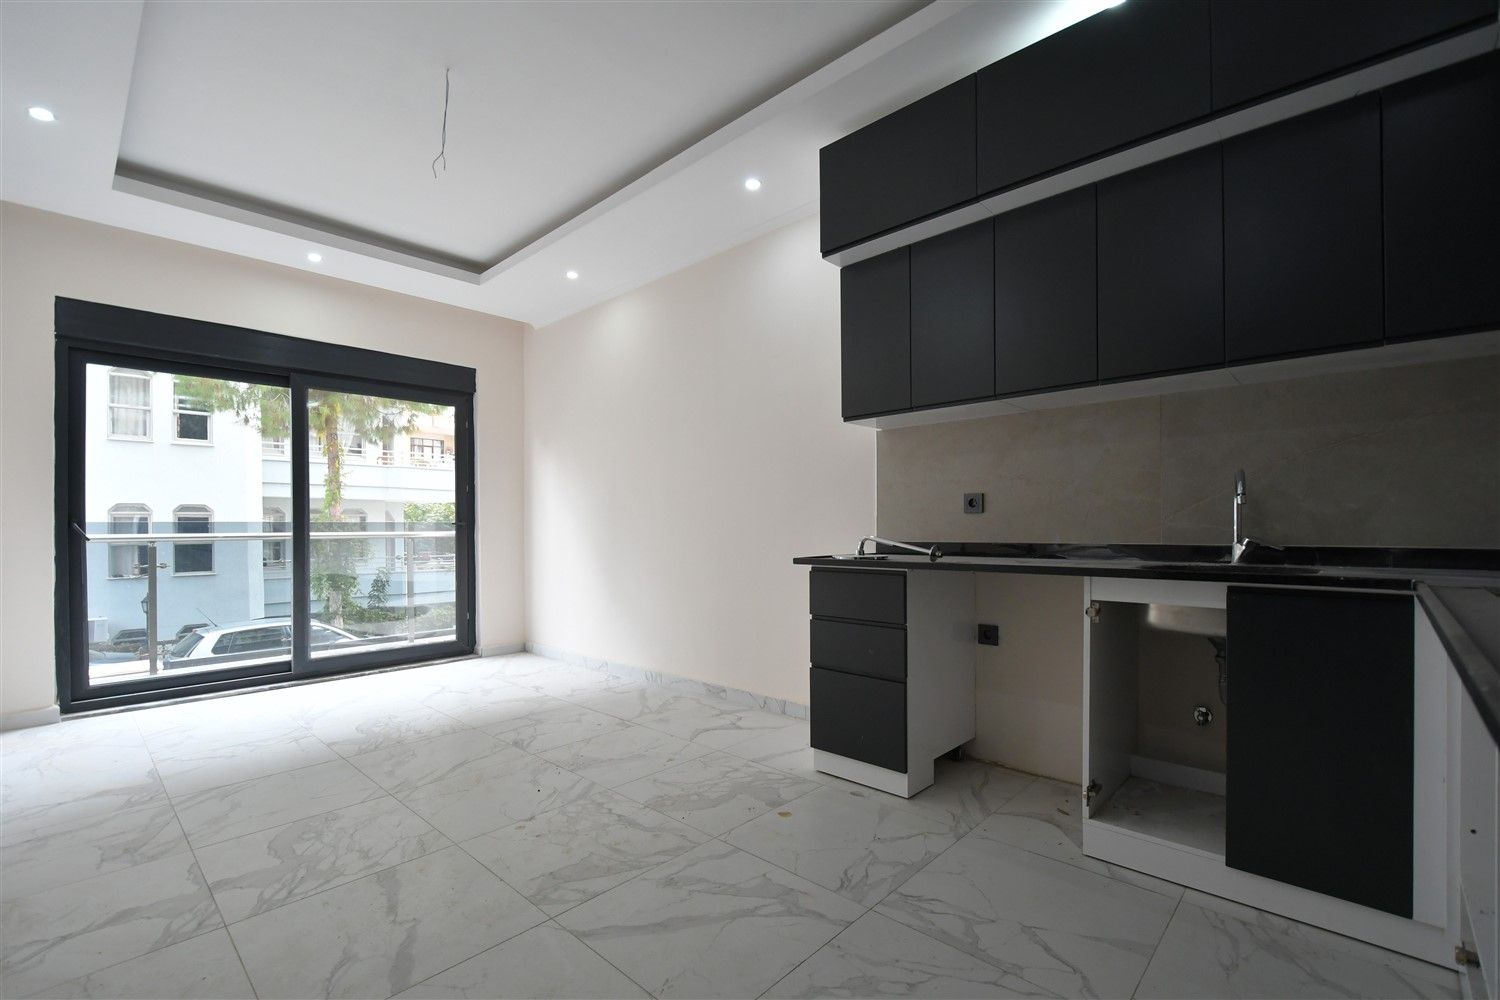 New 1-bedroom apartment in the Alanya center